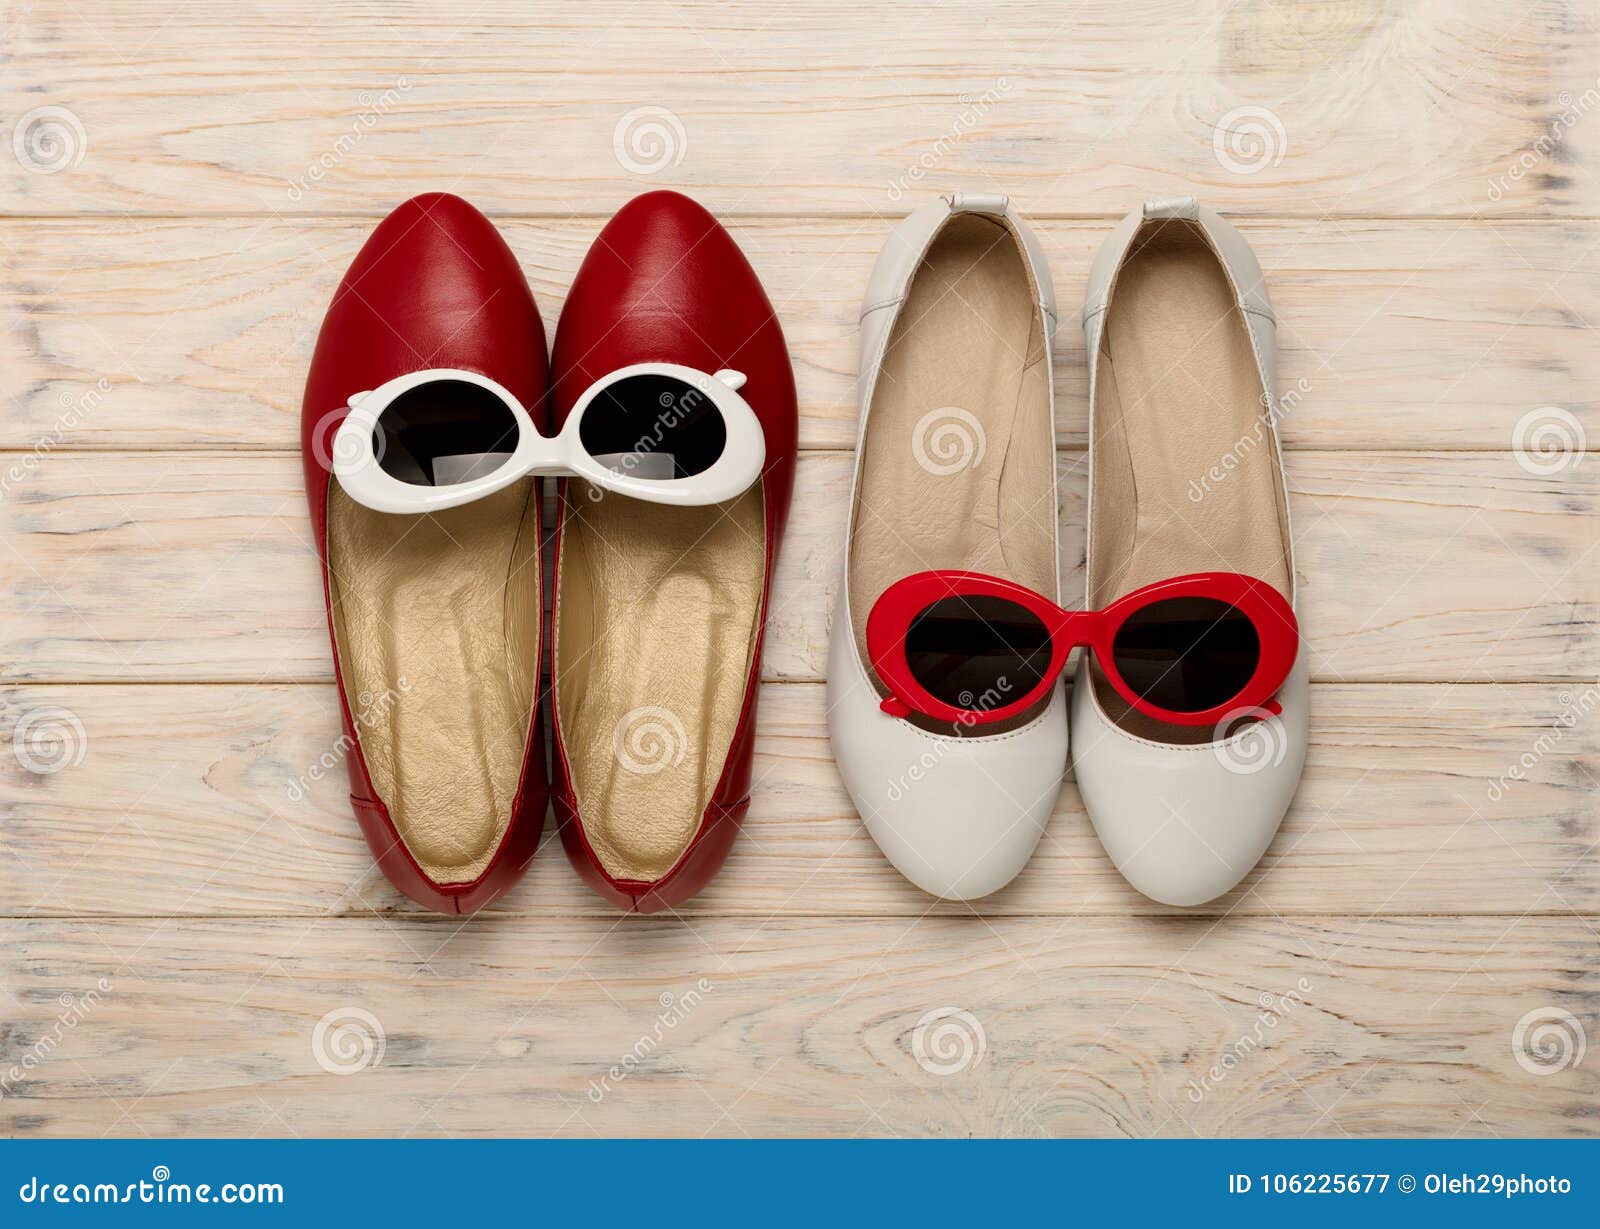 Women`s Shoes and Sunglasses of Red and White Color. Stock Image ...